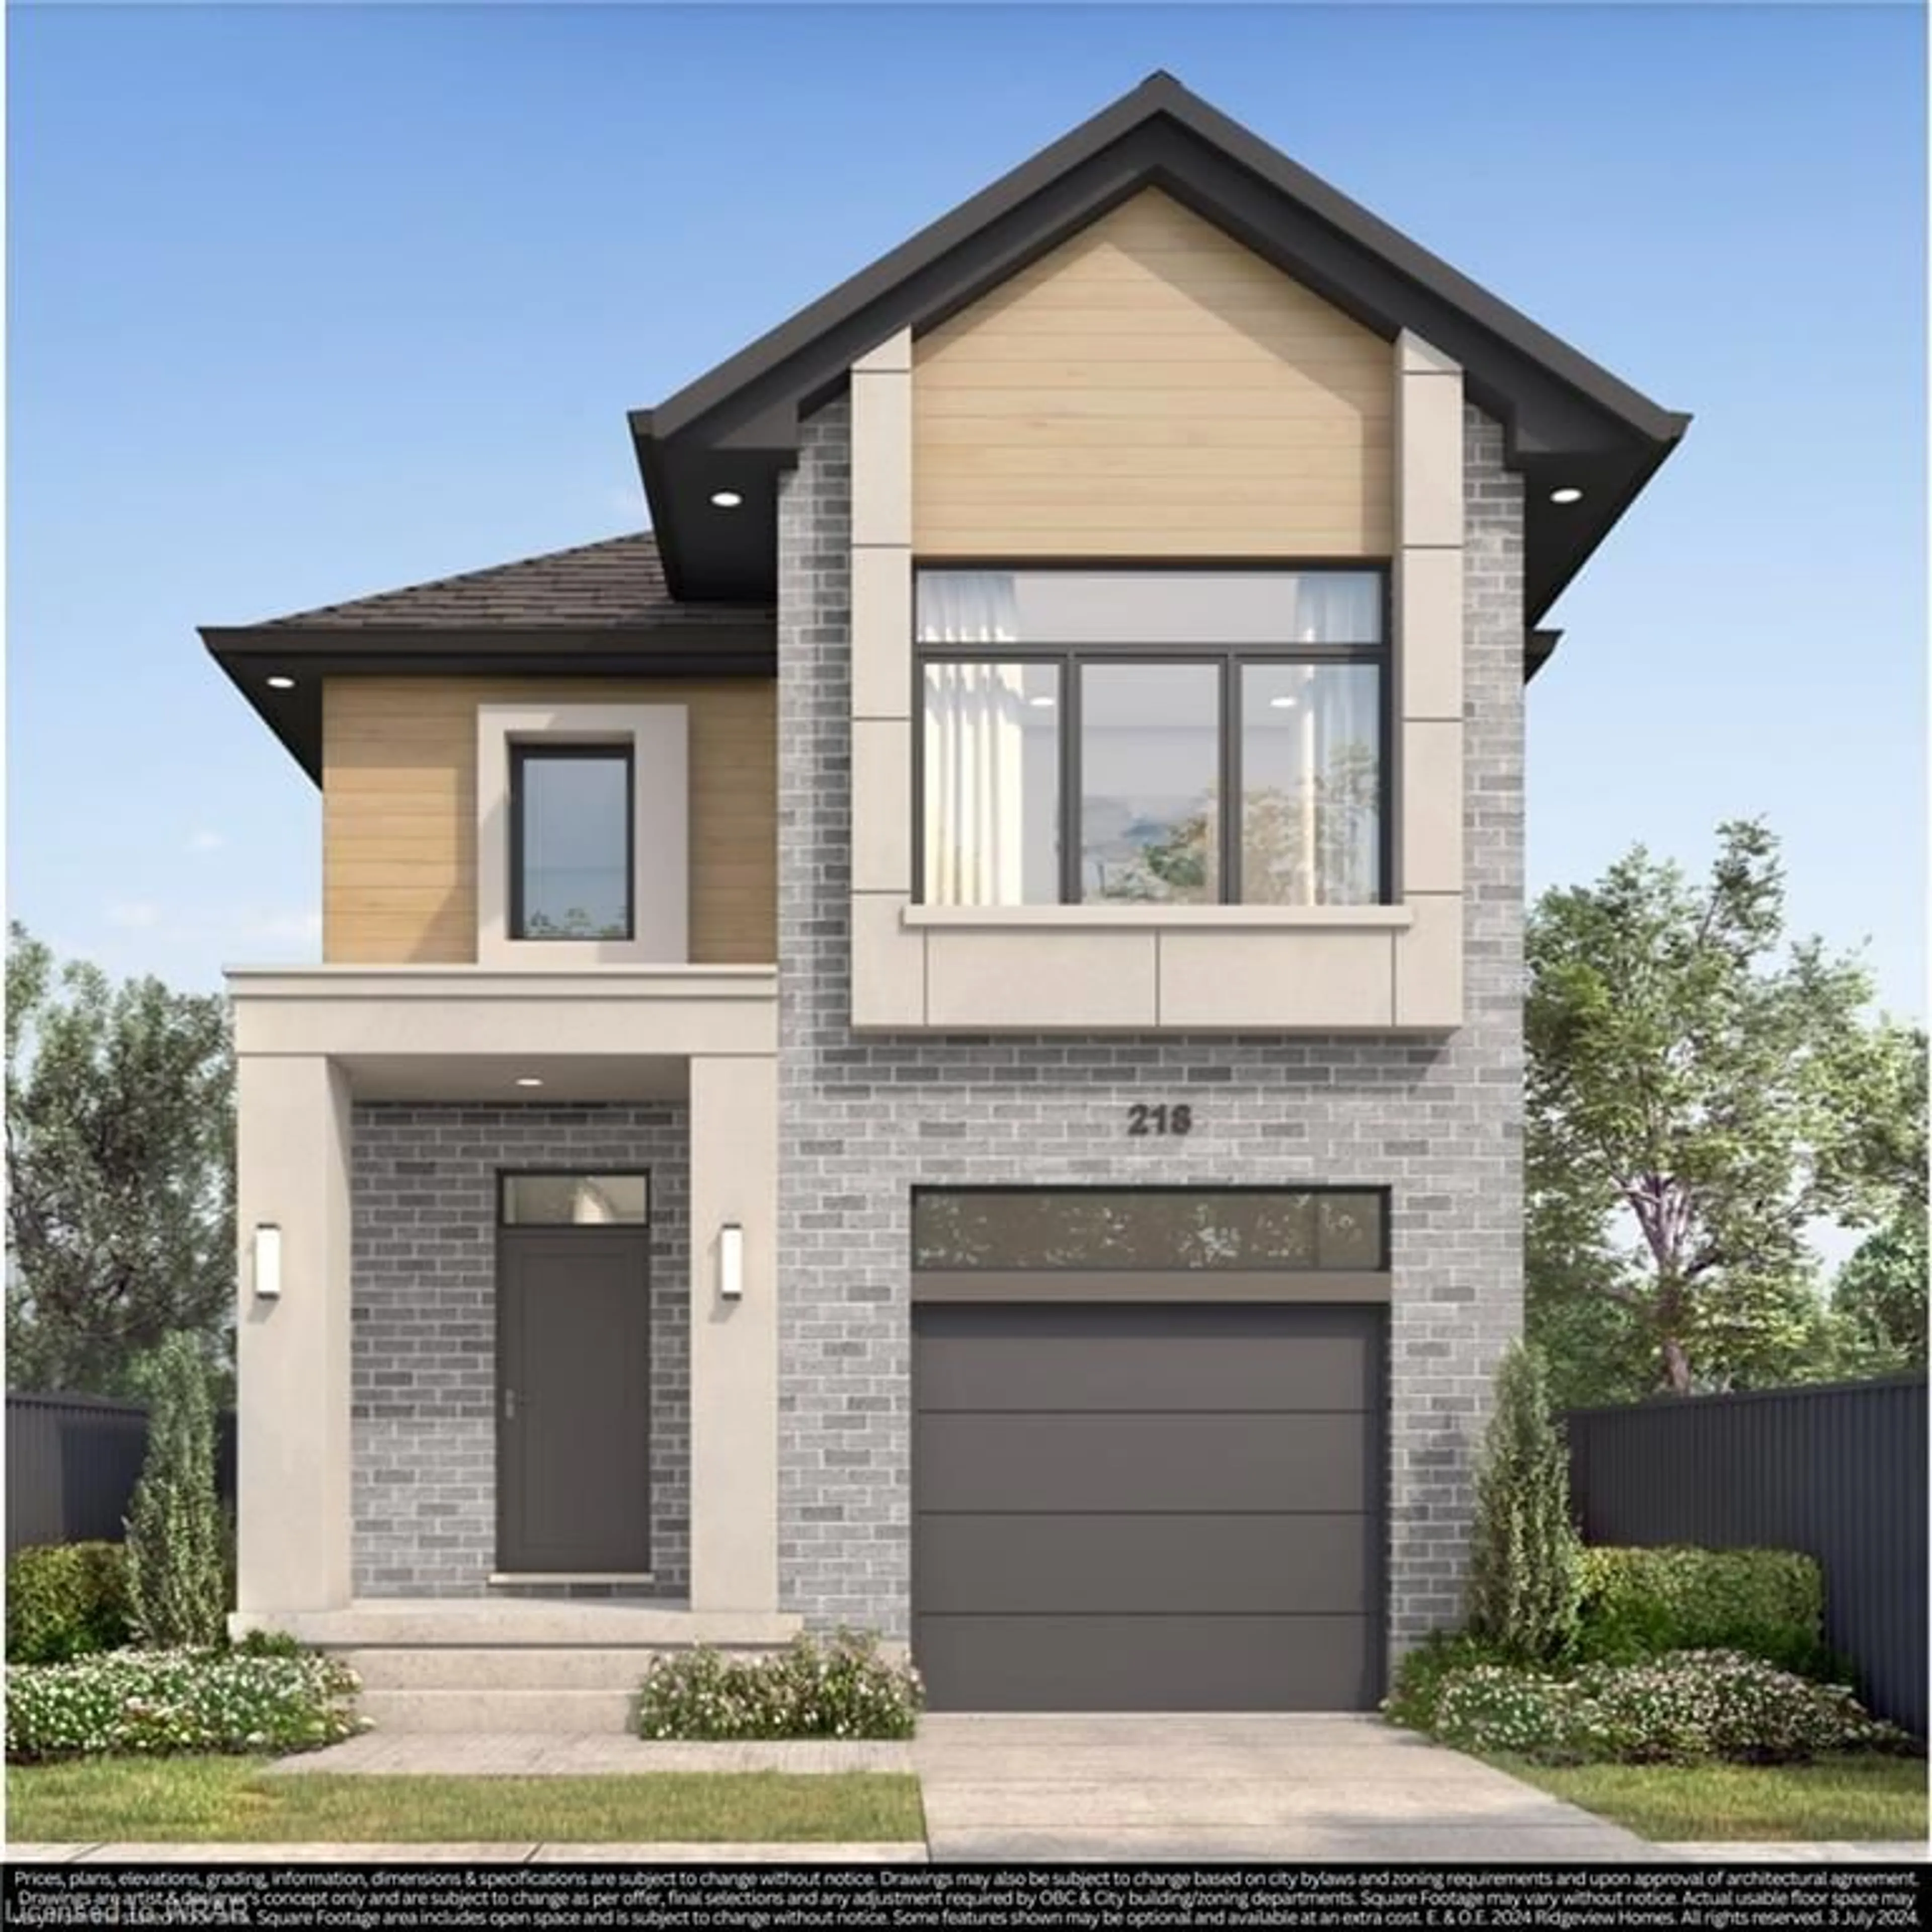 Home with brick exterior material for LOT 33 Green Gate Blvd, Cambridge Ontario N1T 2C5